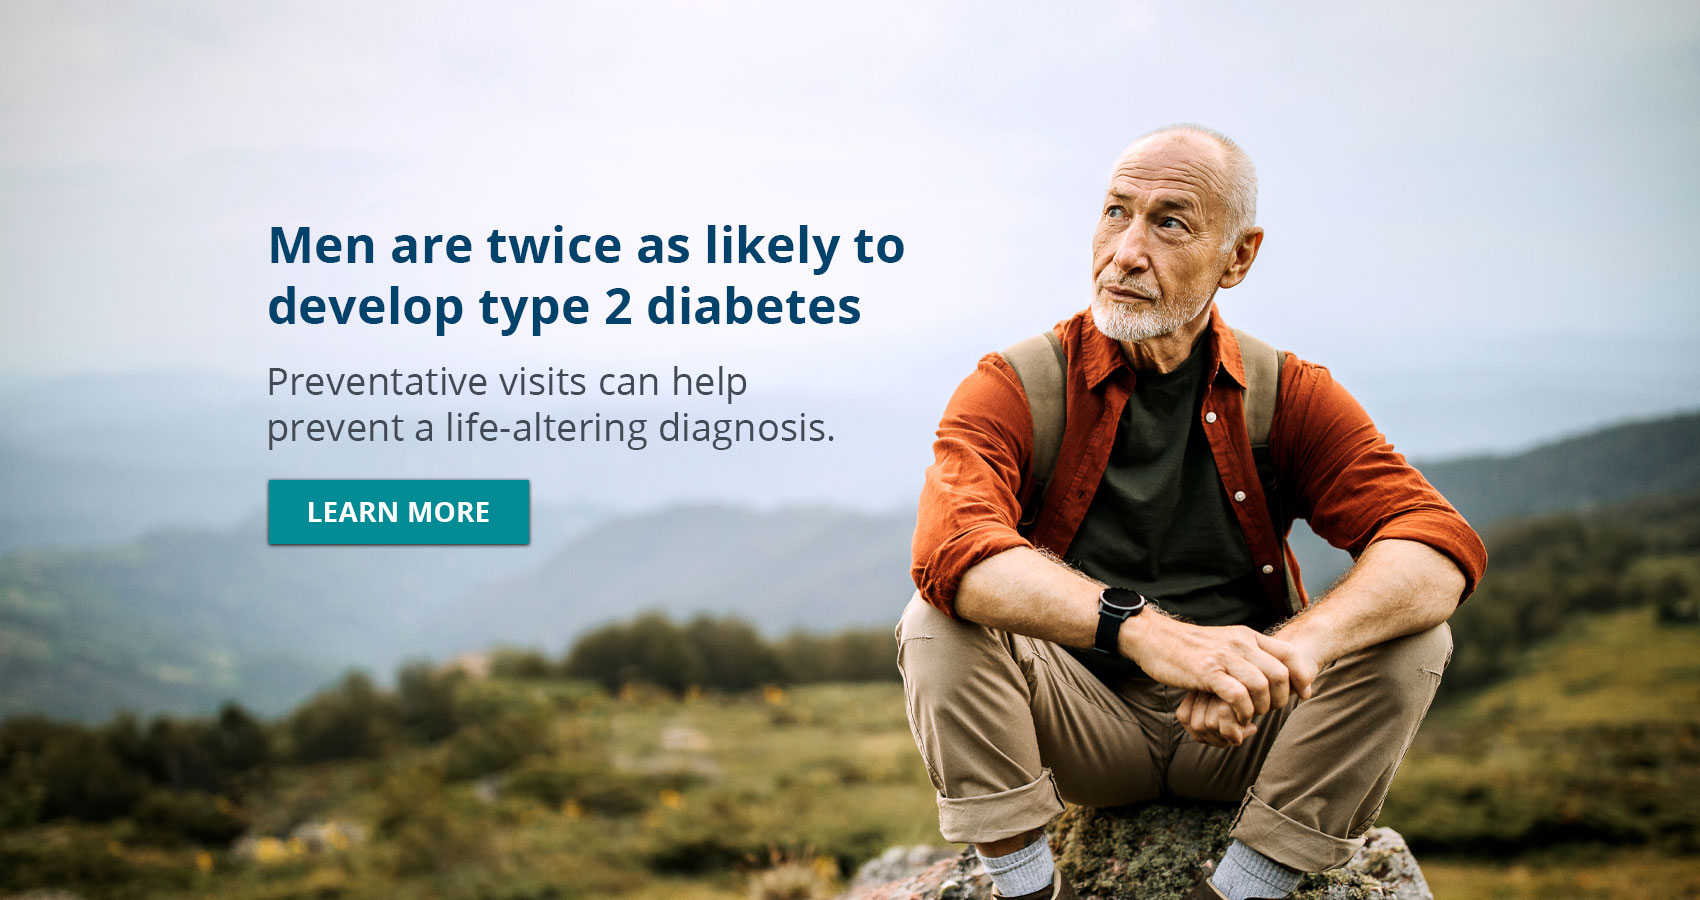 Men are twice as likely to develop type 2 diabetes
Preventatives visits can help prevent a life-altering diagnosis.

(LEARN MORE) Link